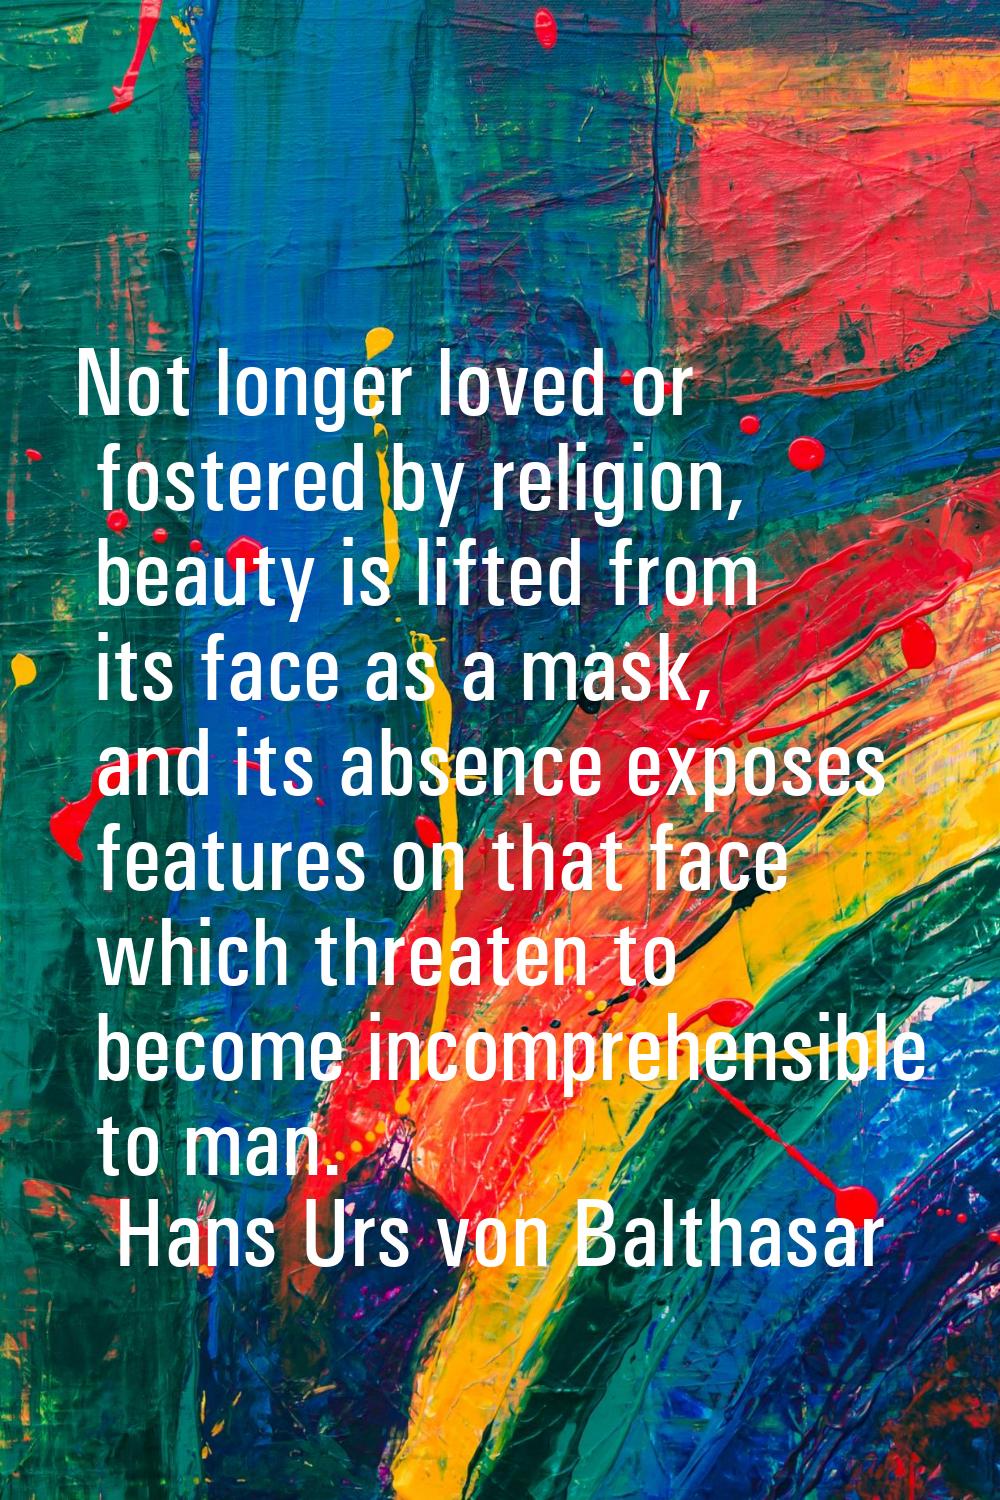 Not longer loved or fostered by religion, beauty is lifted from its face as a mask, and its absence